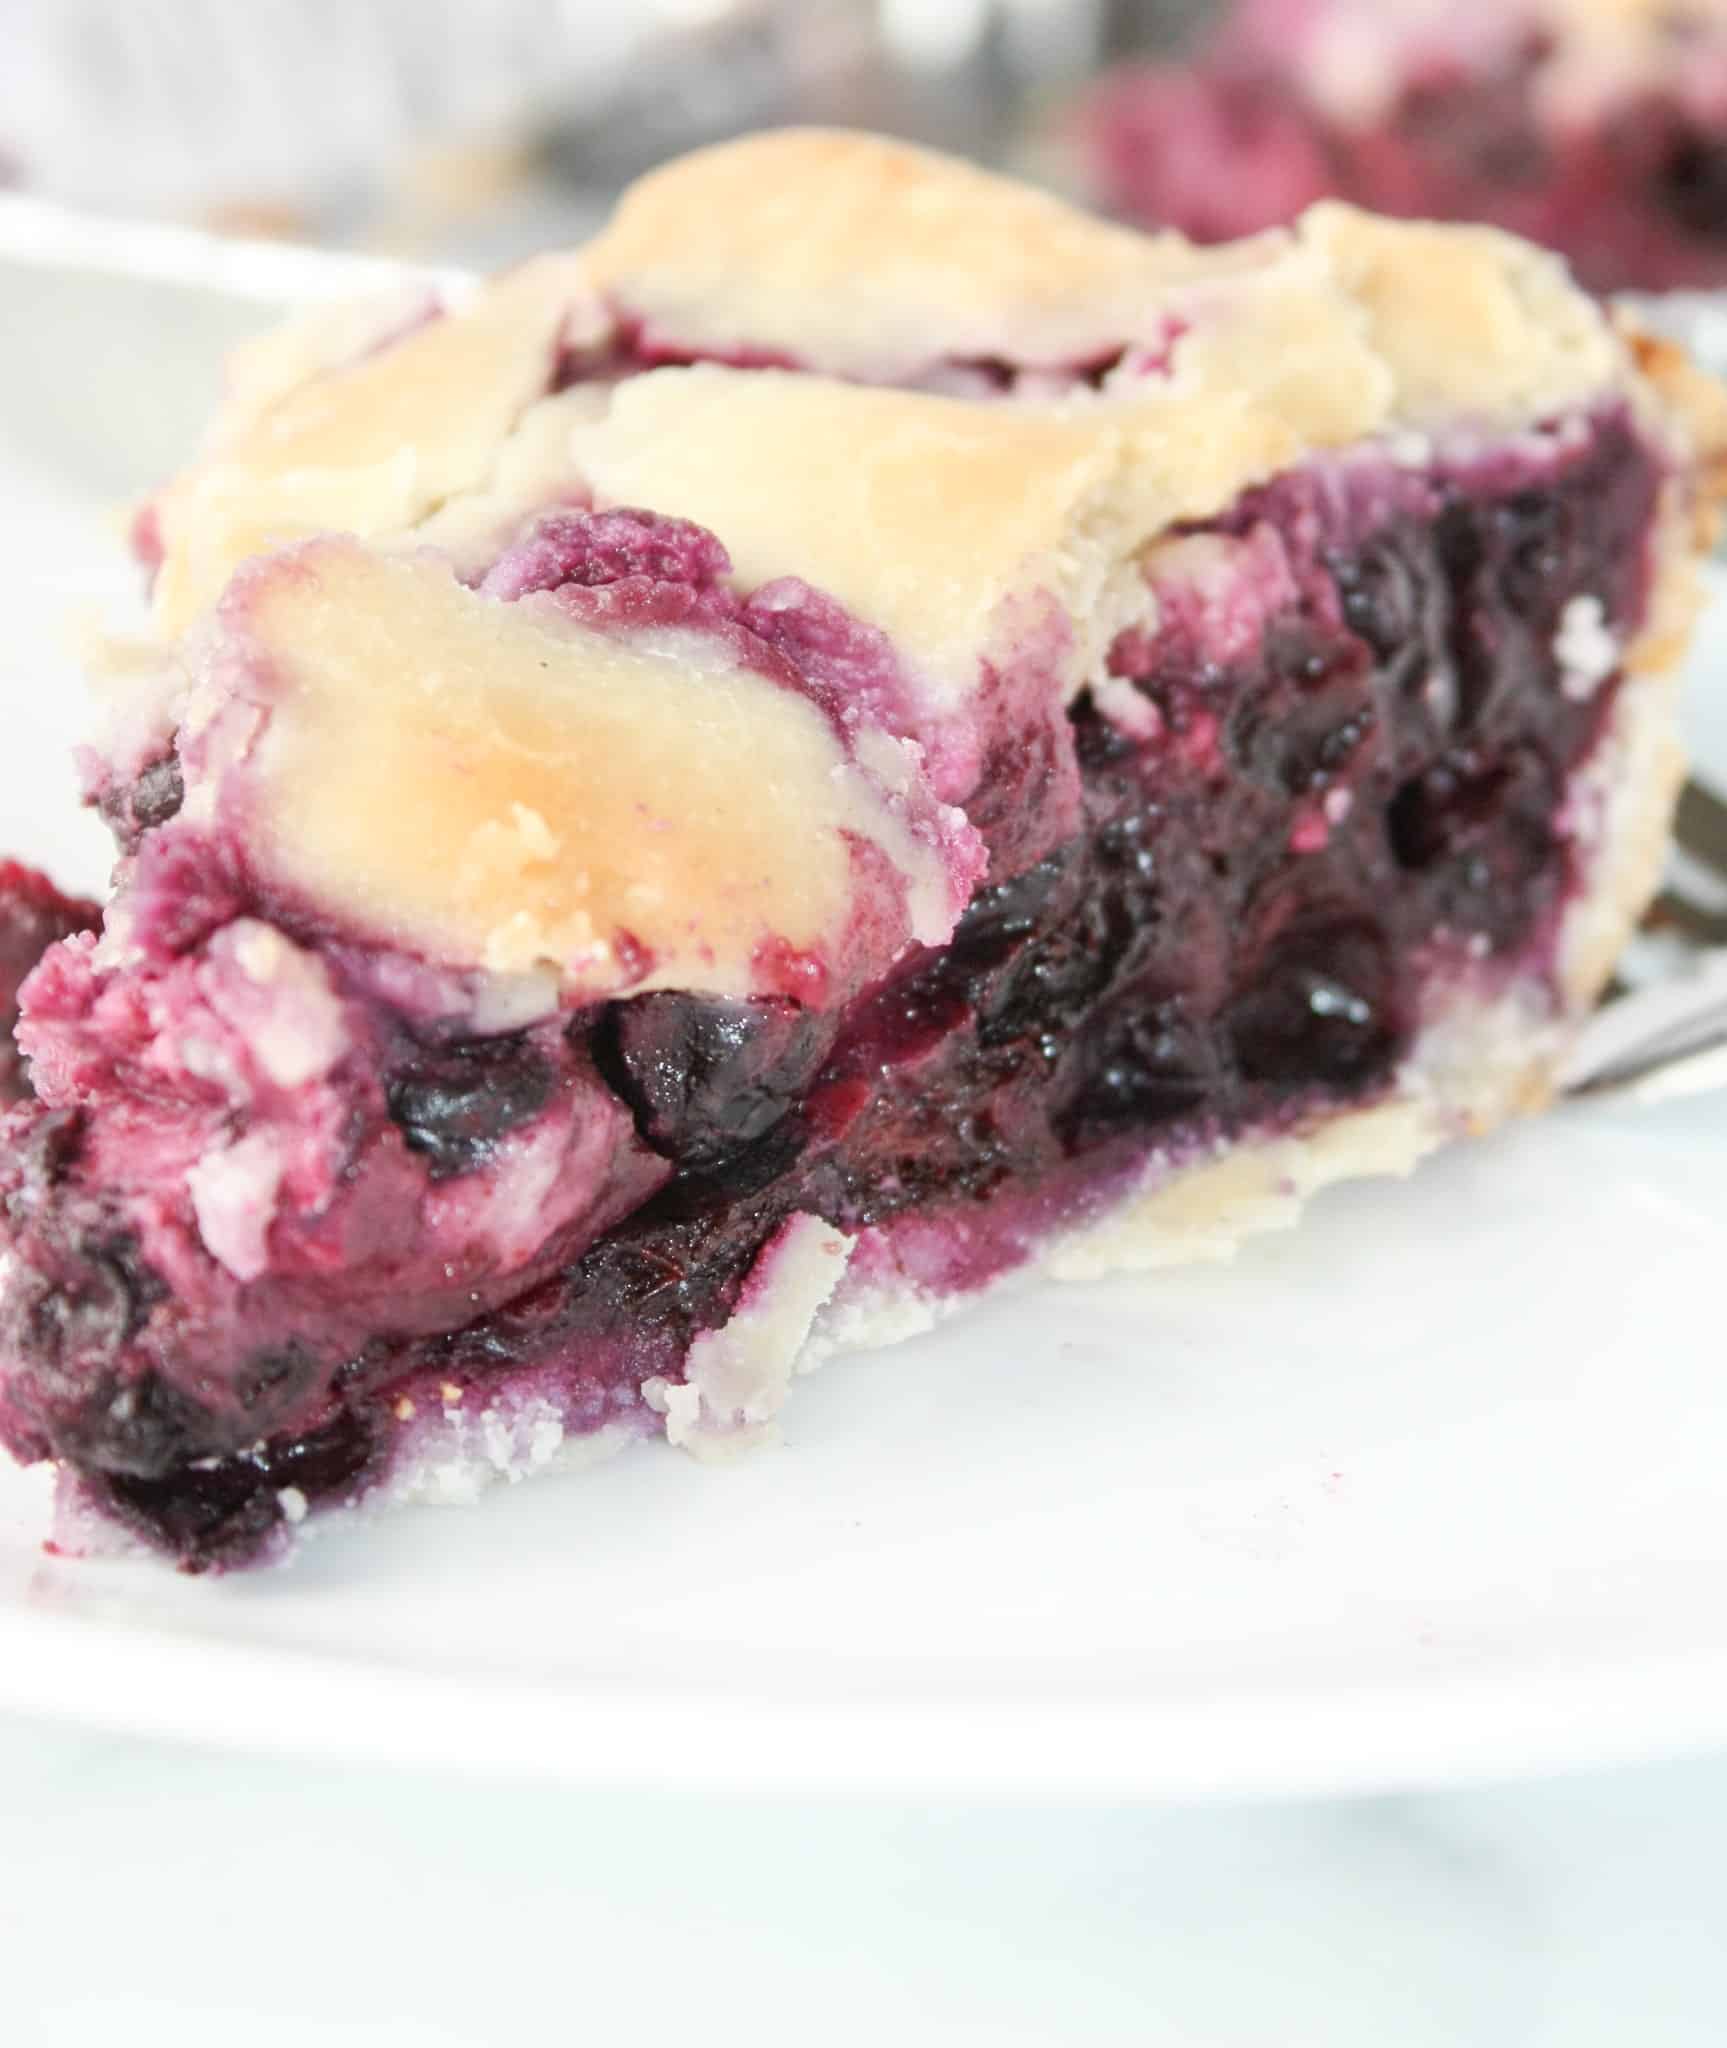 Gluten Free Blueberry Pie is a popular seasonal dessert.  This easy, gluten free, fruit filled dessert can be a great finish to a family meal.